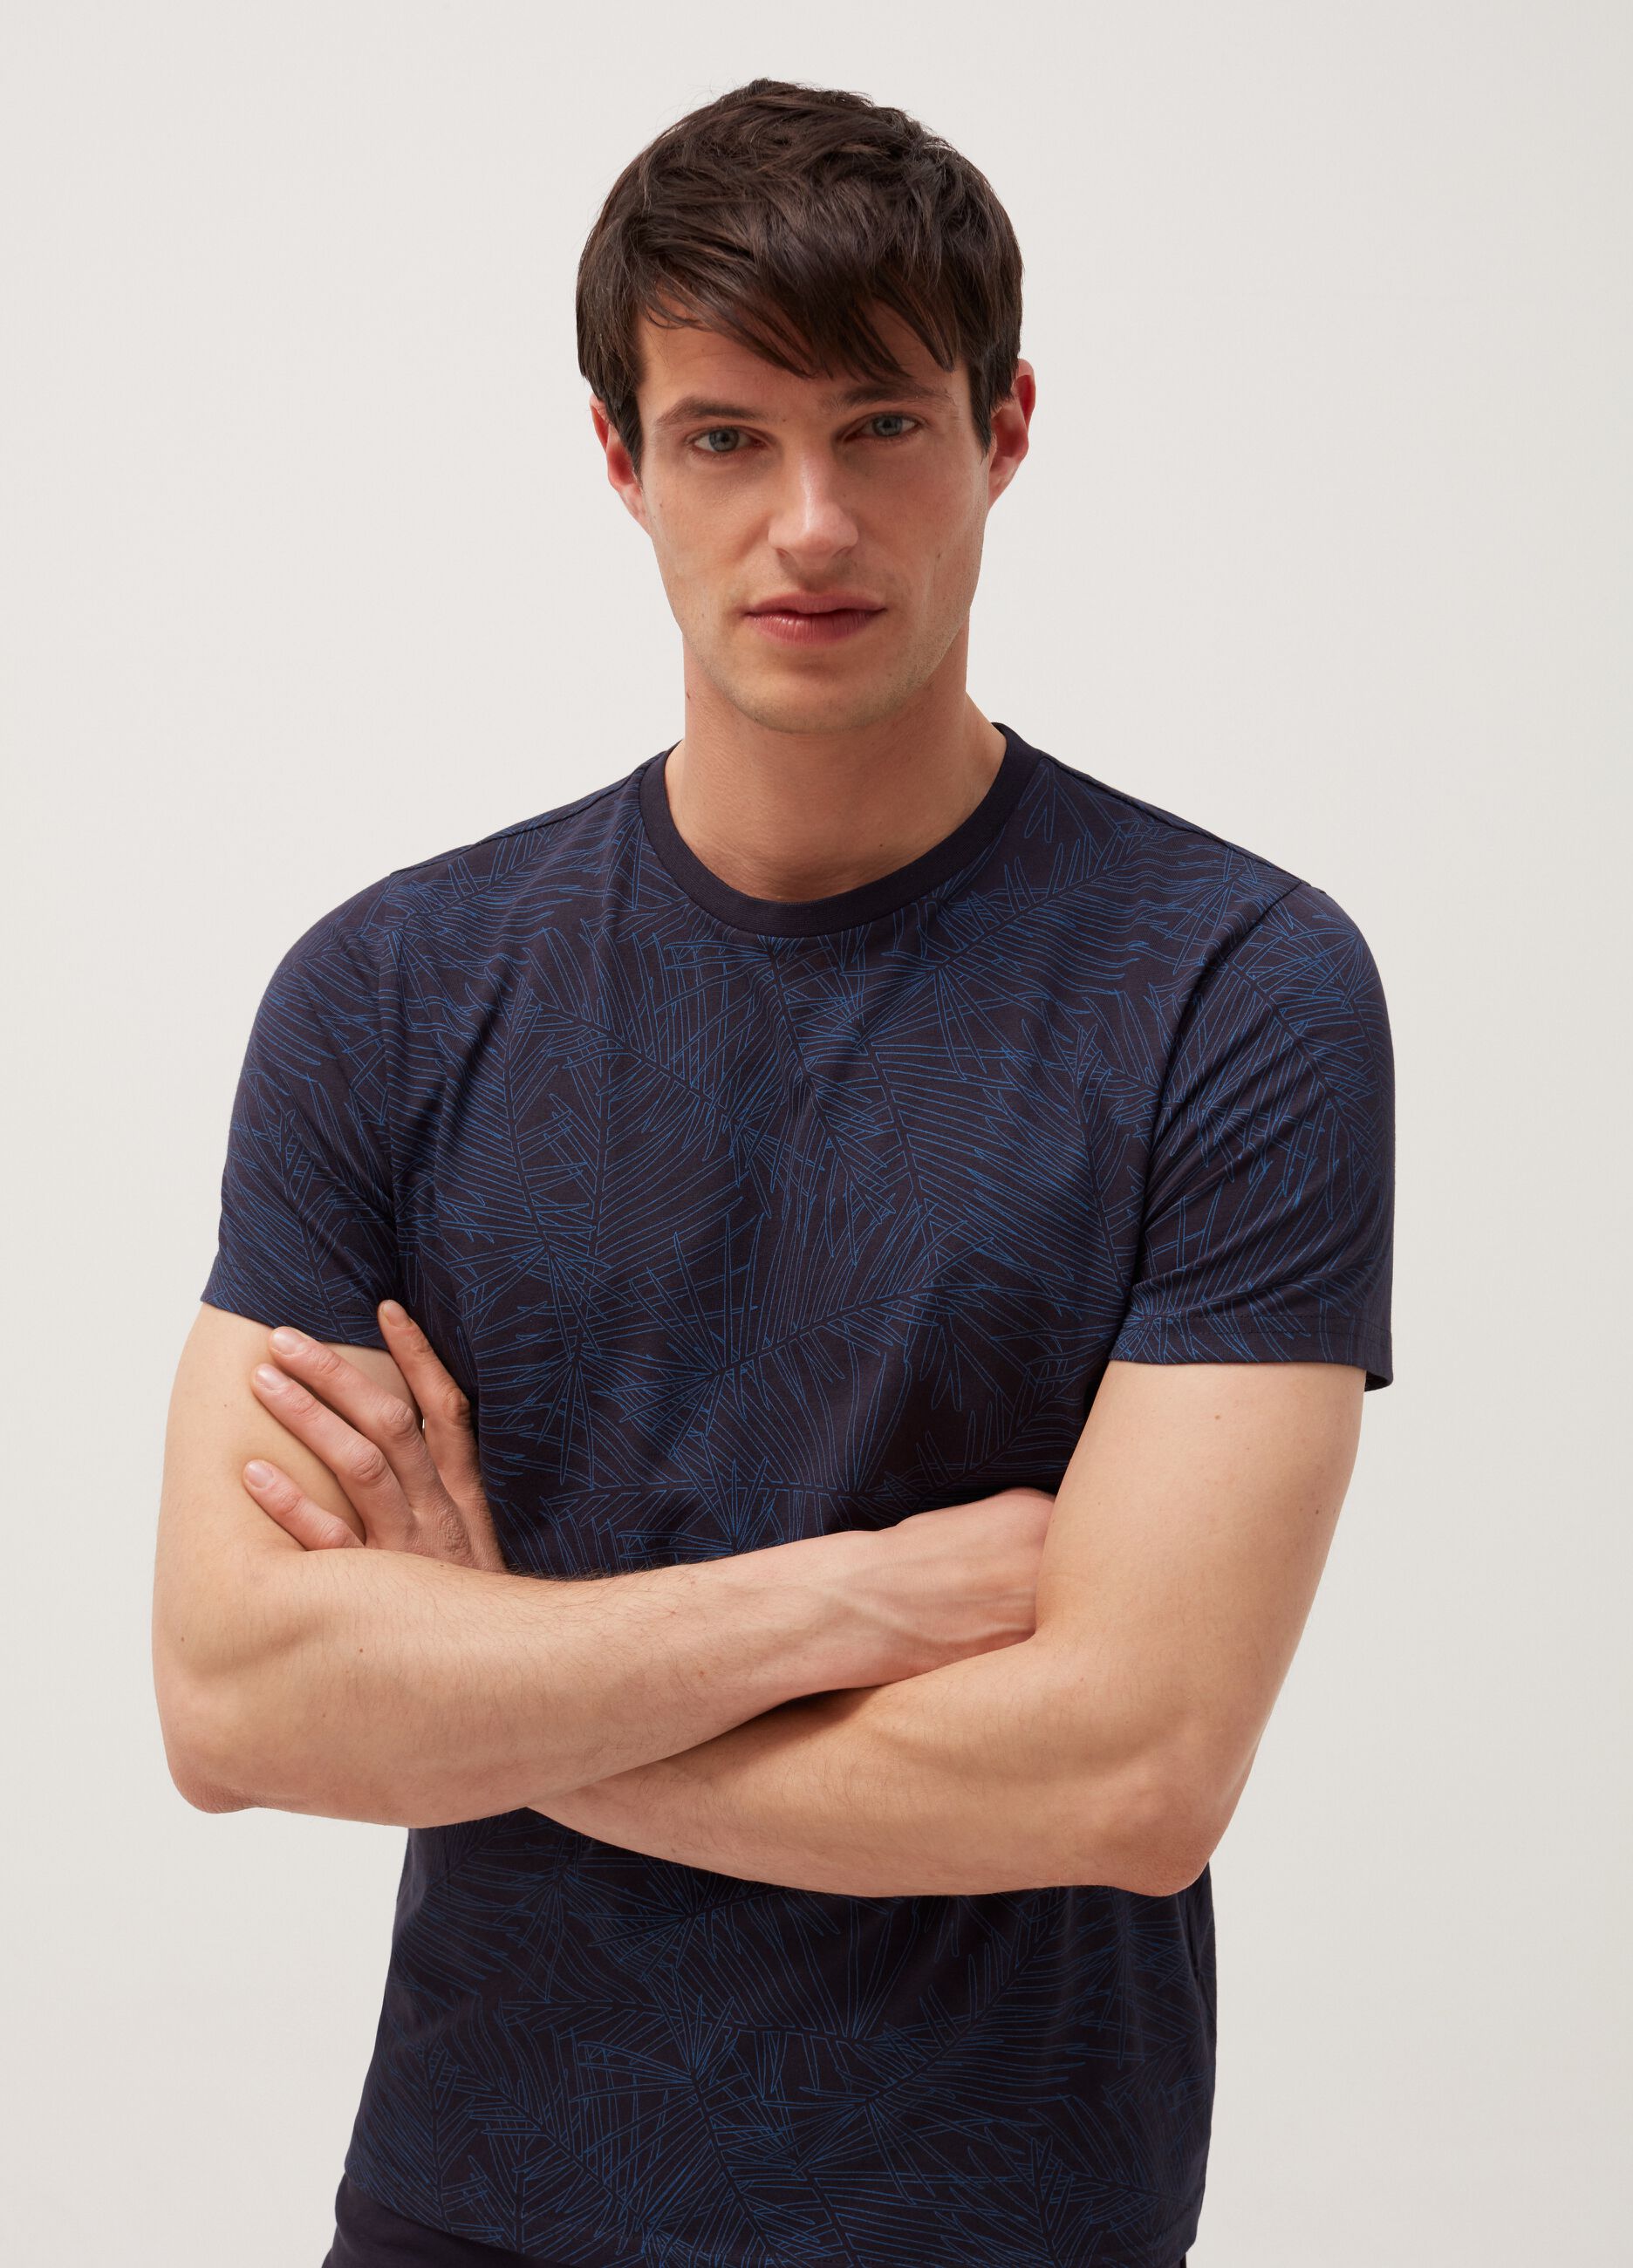 Short pyjamas with round-neck patterned top